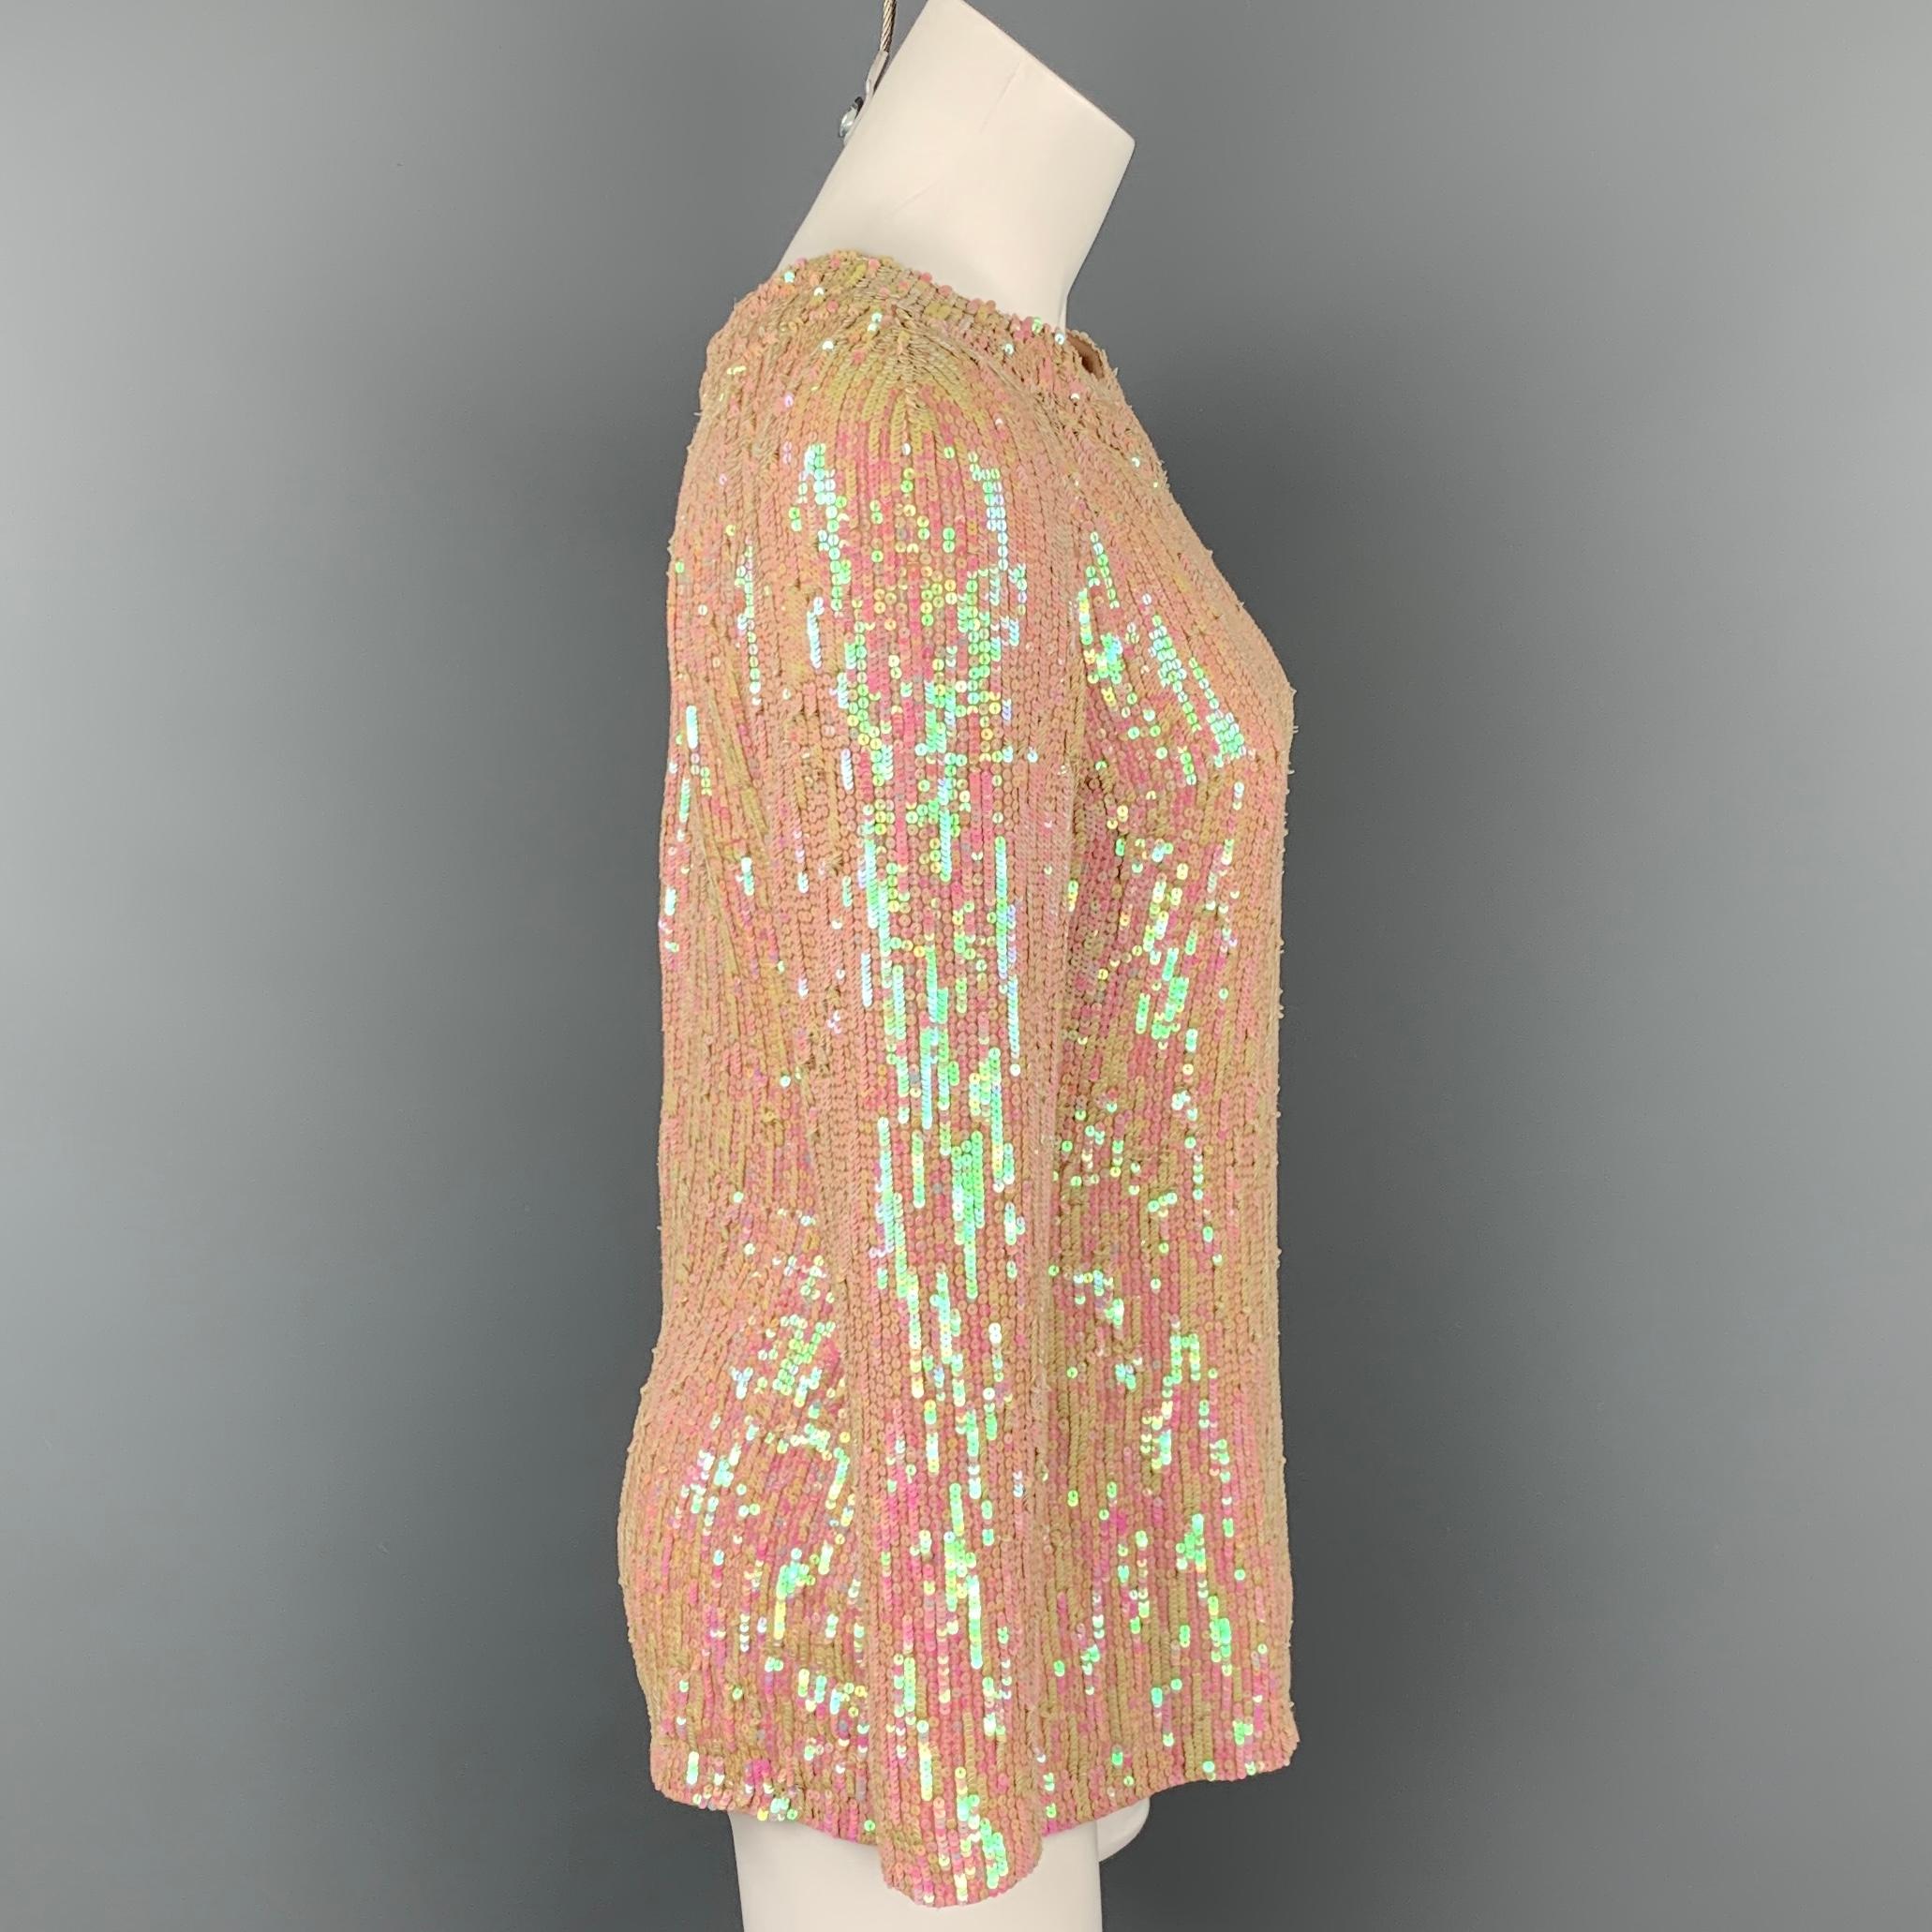 DRIES VAN NOTEN dress top comes in a iridescent & nude sequin silk featuring long sleeves and a back hook & loop closure.

Very Good Pre-Owned Condition.
Marked: 38

Measurements:

Shoulder: 17.5 in.
Bust: 36 in.
Sleeve: 21 in.
Length: 24 in. 